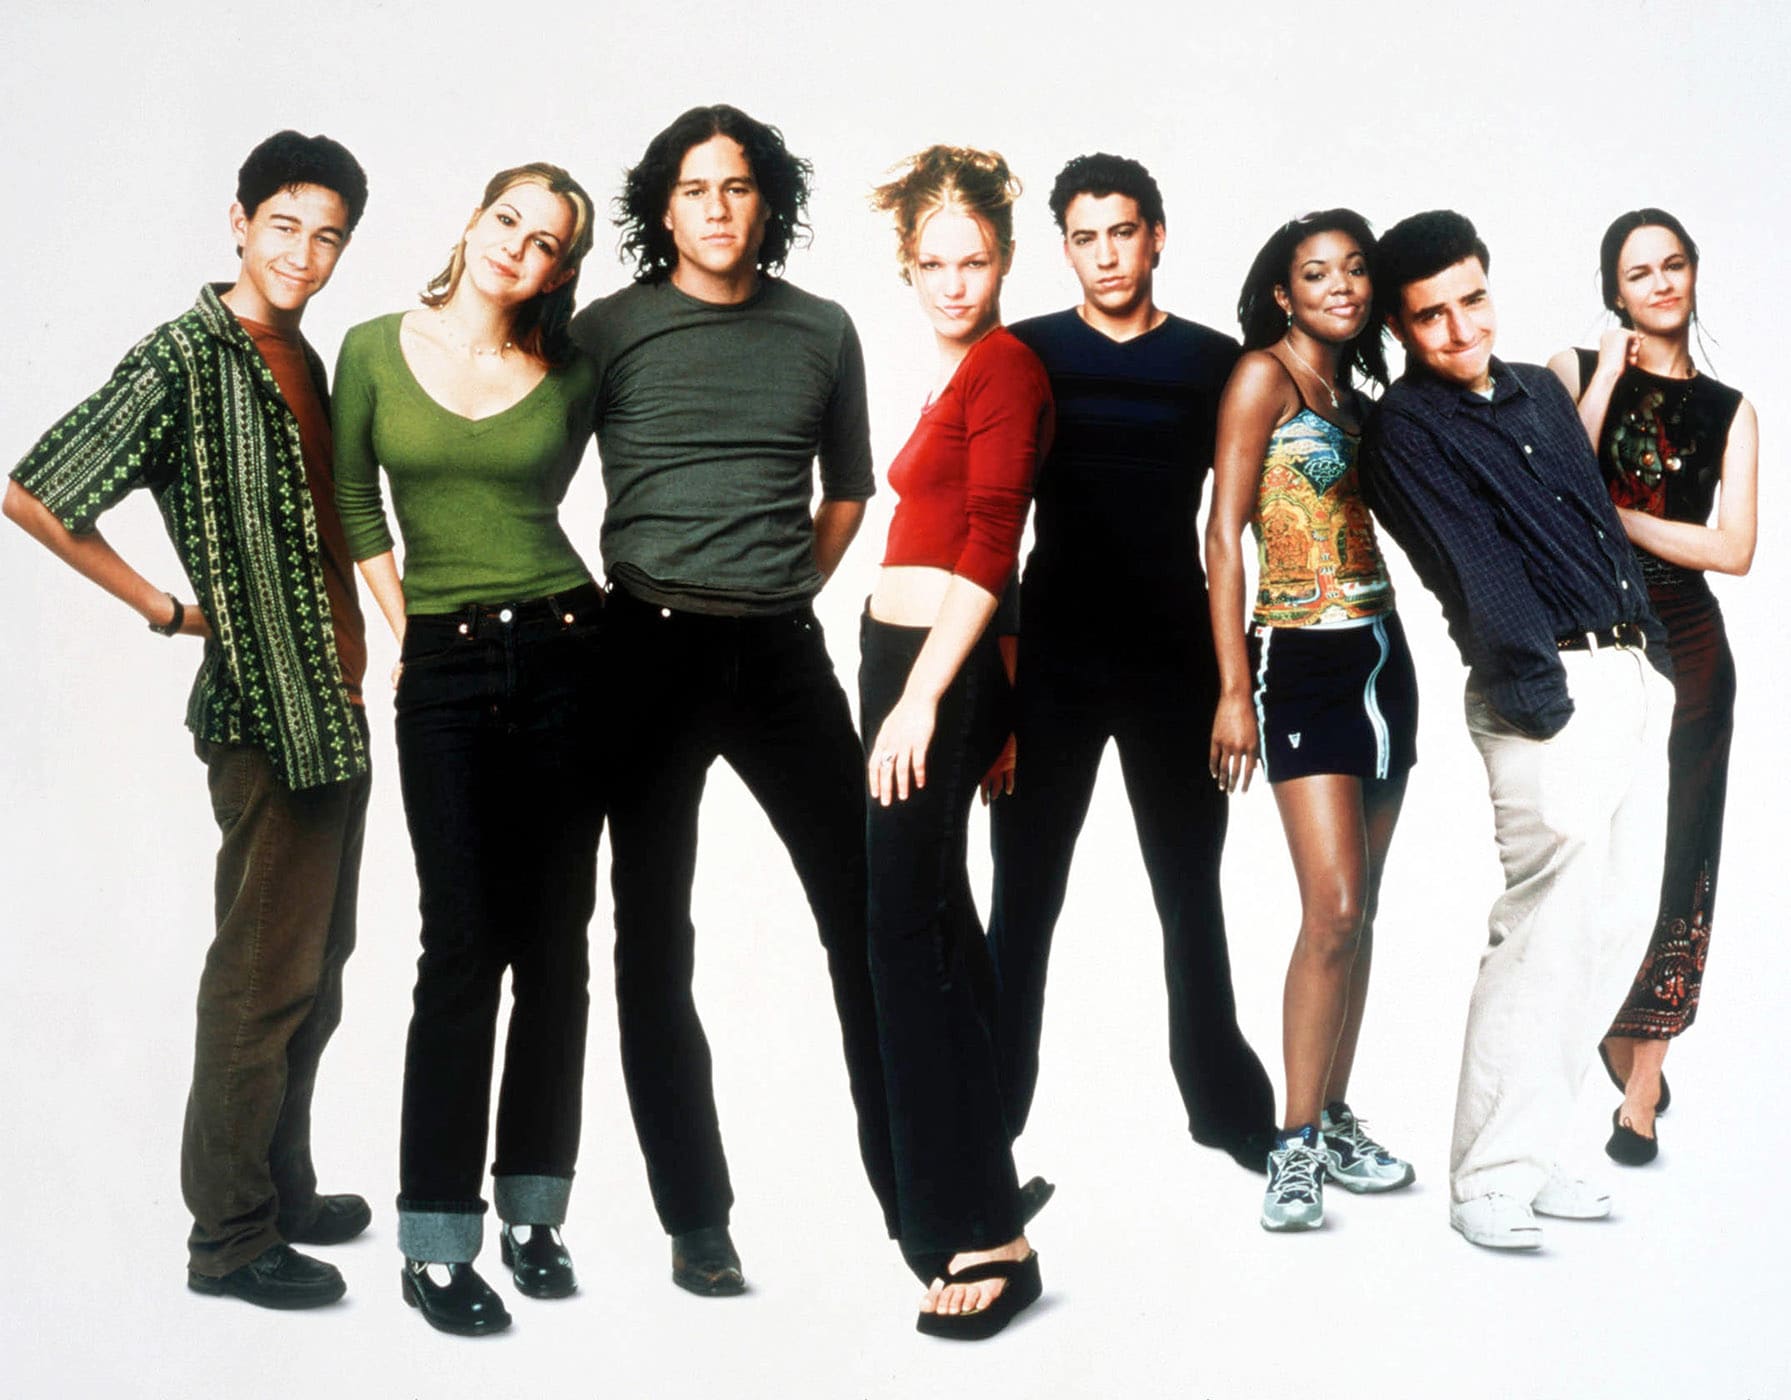 The young stars of '10 Things I Hate About You' .